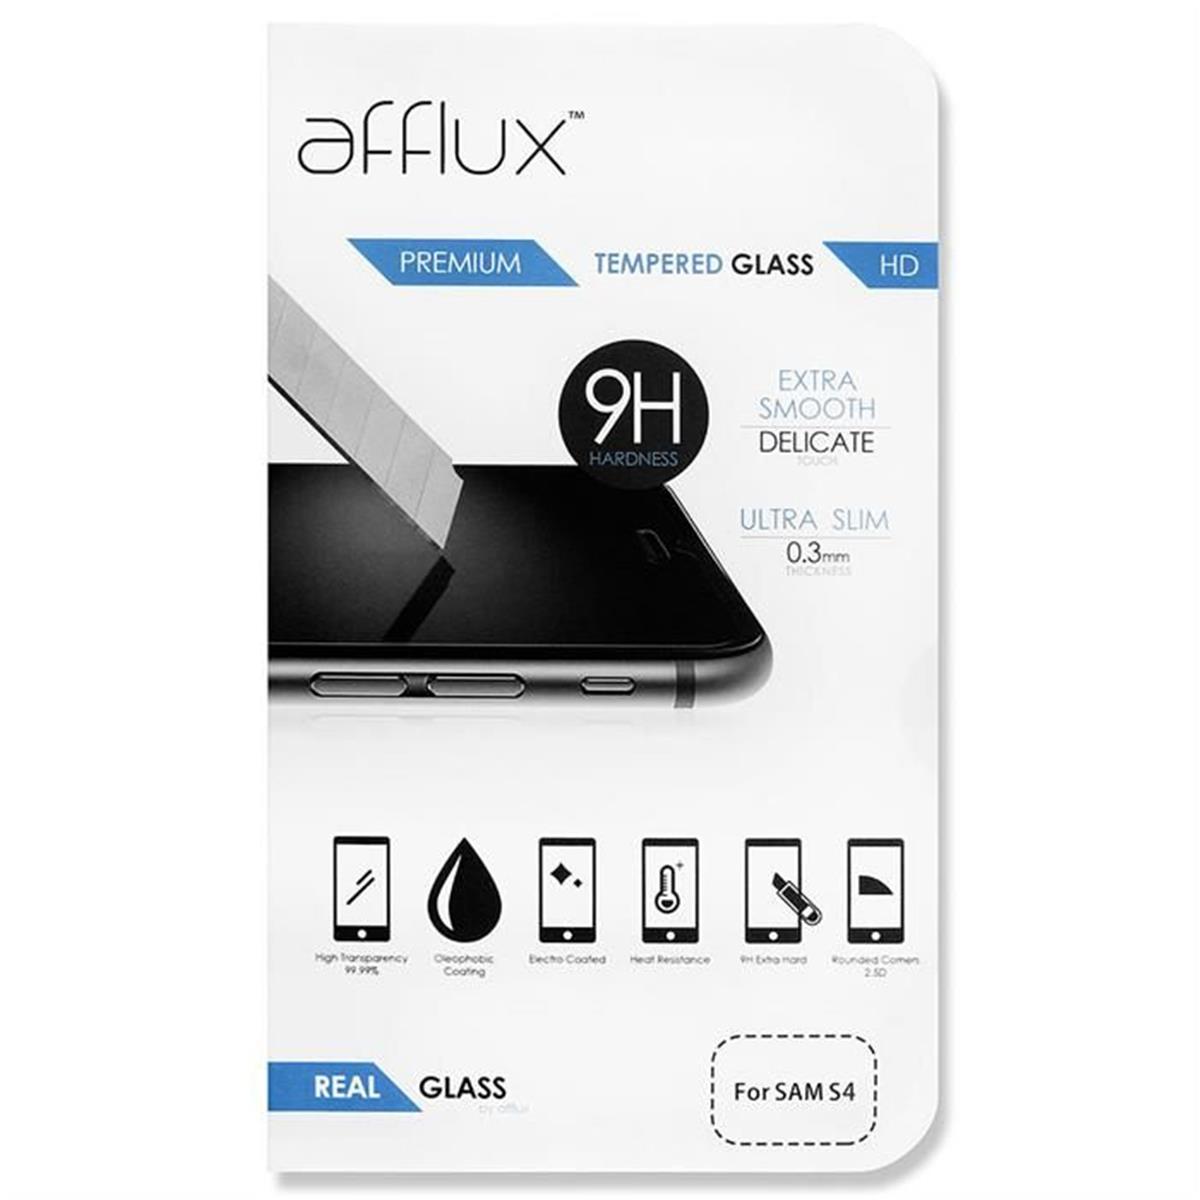 1541-n Afflux Premium Real Tempered Glass Screen Protector For Samsung Galaxy S4